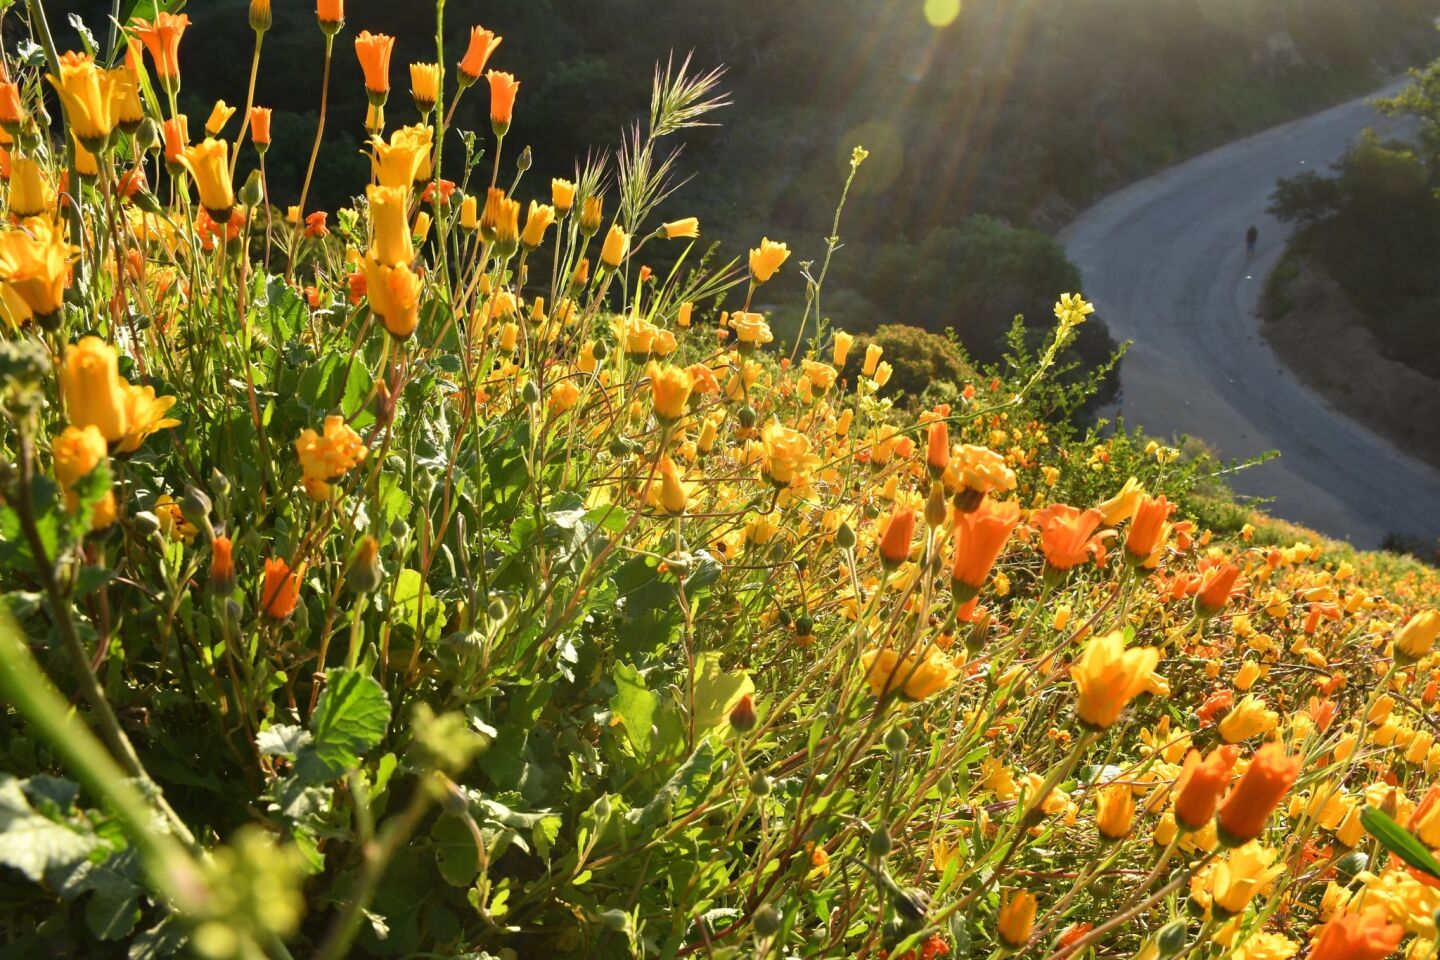 Wildflowers flourish in Griffith Park. Southern California last experienced a great wildflower bloom in 2017 (see super bloom photos).